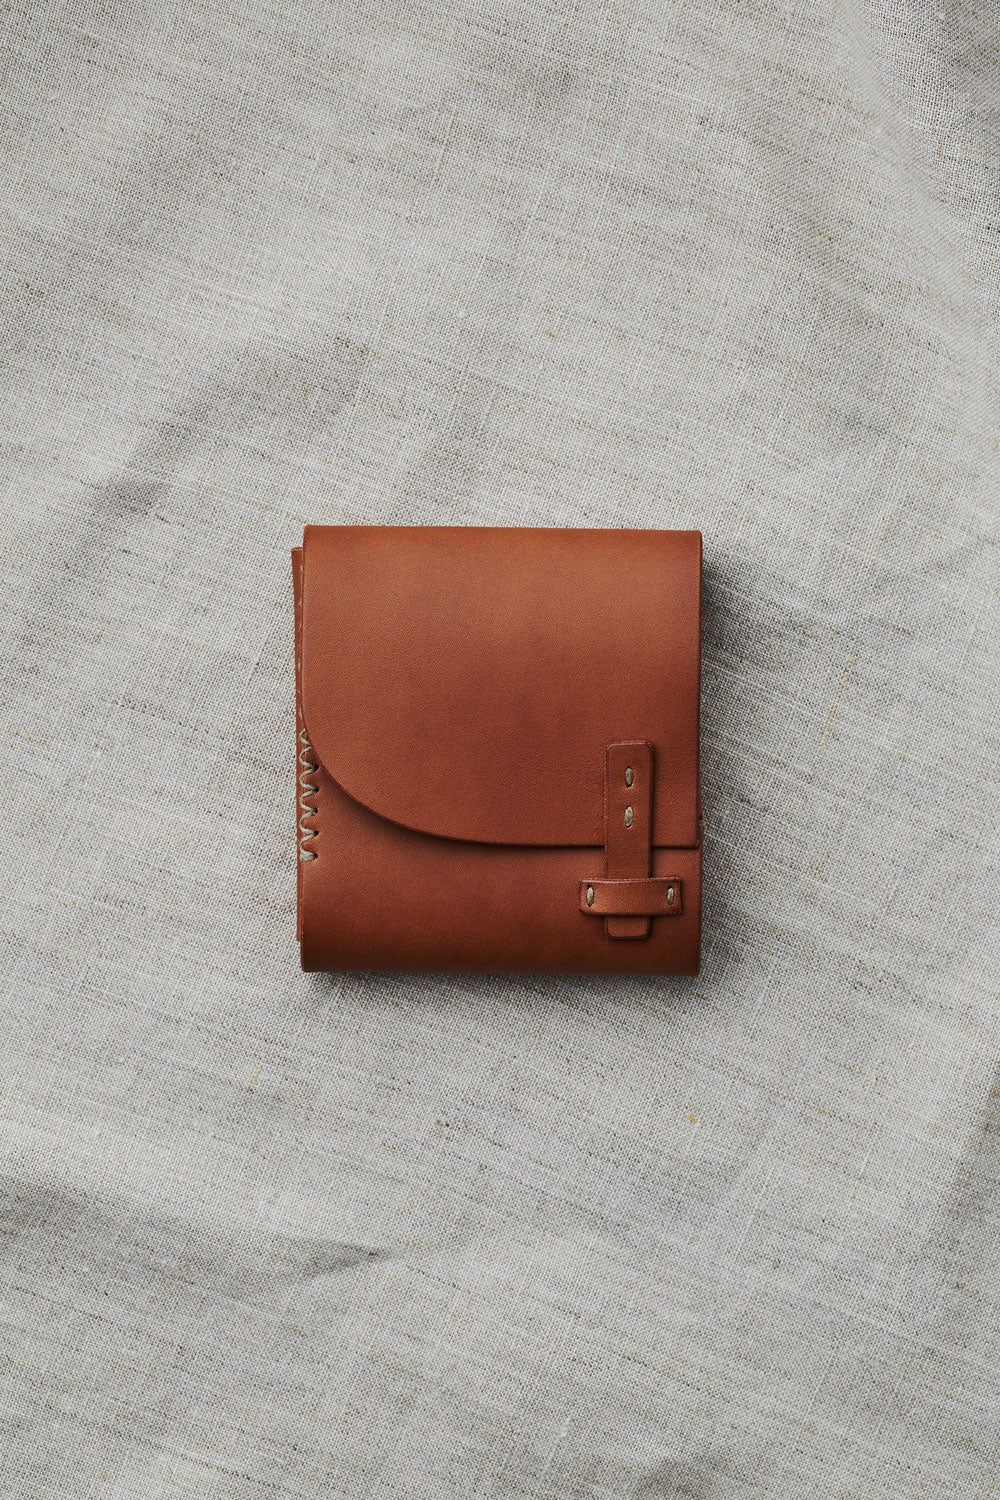 roots 根 / wallet